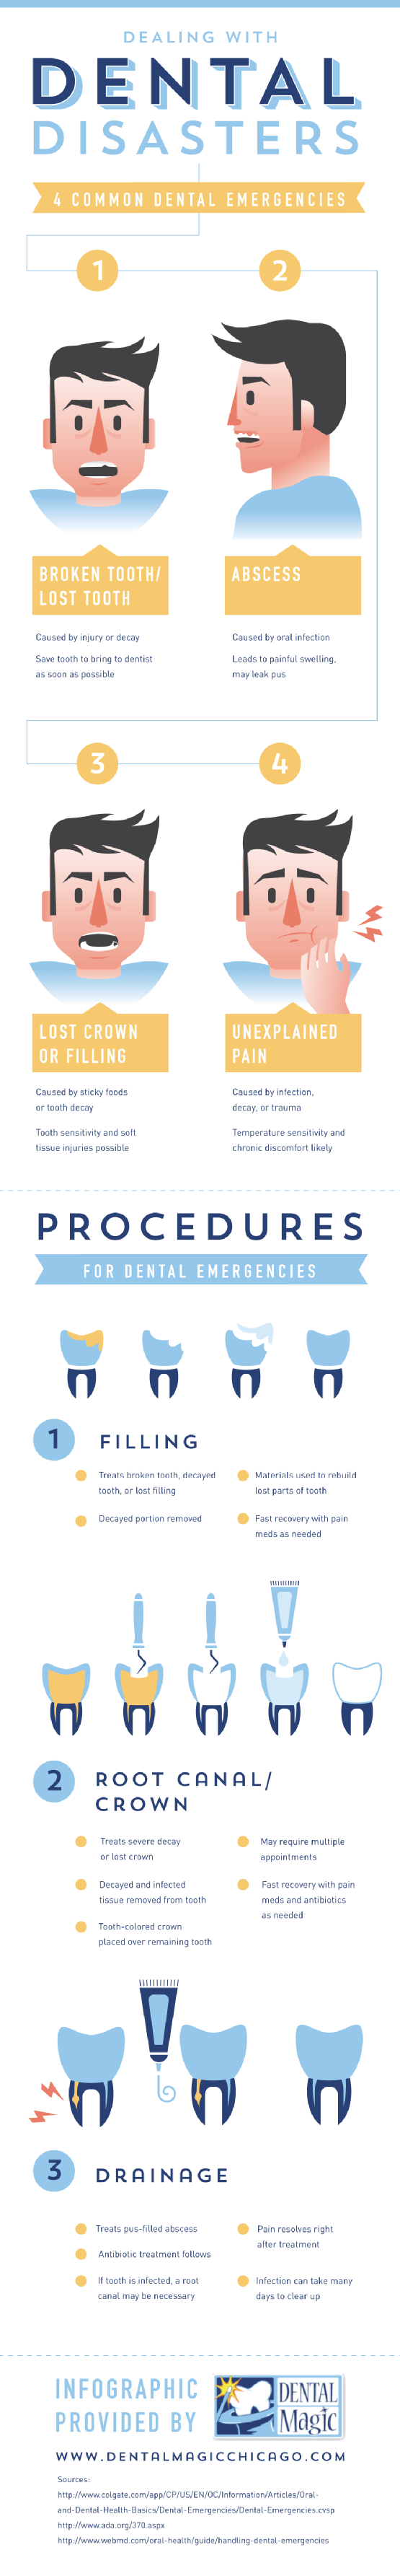 4 Common Dental Emergencies and How to Deal With Them Infographic